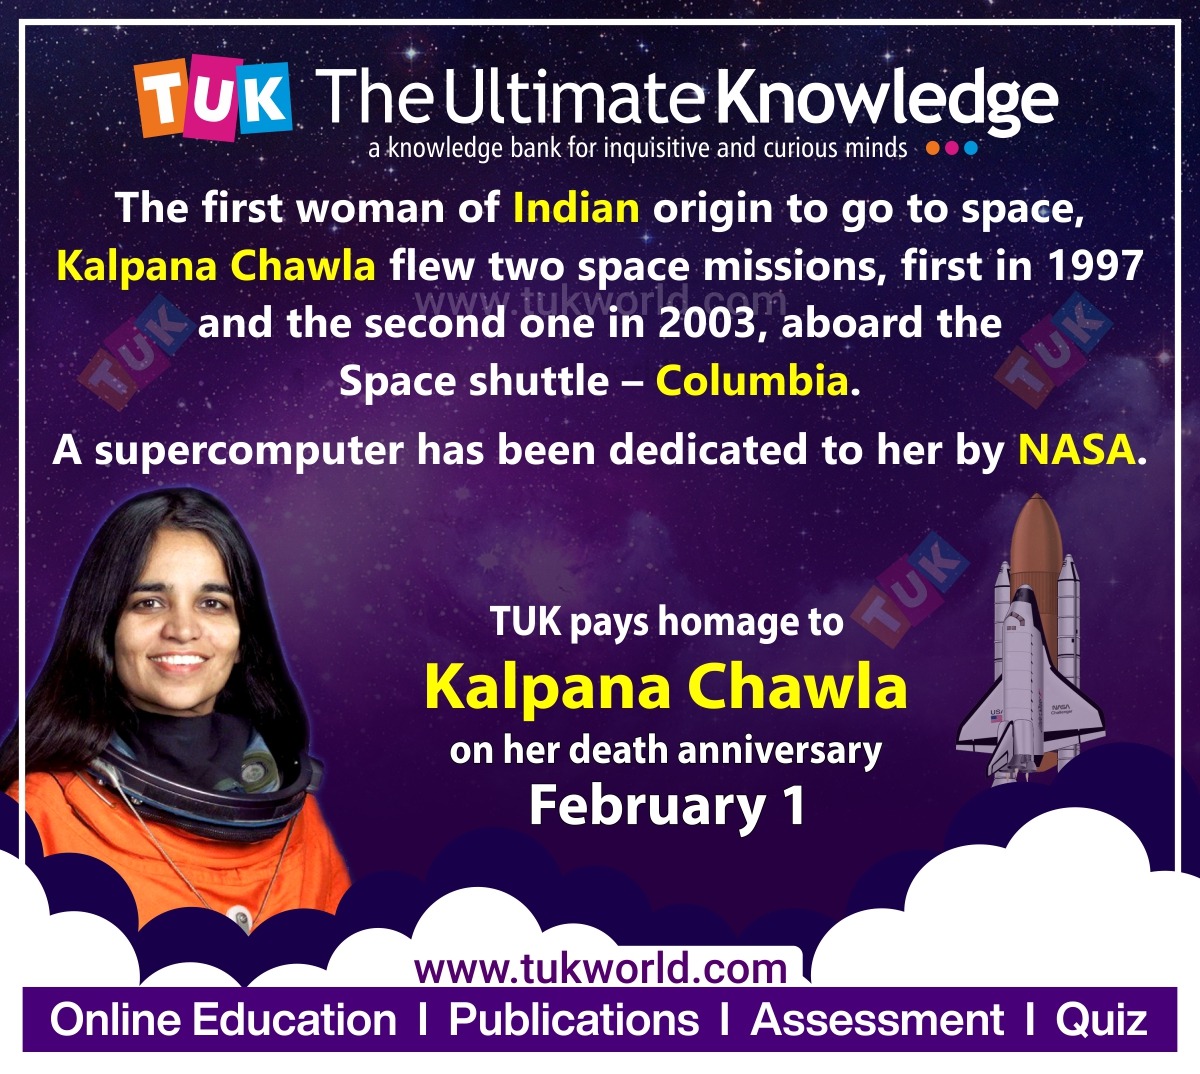 LL REV tL eee

a AA bank for inquisitive and curious minds ®
LL) po" woman of Indian origin to go to space,
Kalpana Chawla flew two ETL missions, first in 1997
and the second one in 2003, aboard the
Space shuttle — Columbia.

A supercomputer has been dedicated to her by NASA.

TUK pays homage to
Kalpana Chawla
on her death anniversary

February 1

www.tukworld.com
Online Education | Publications | Assessment | Quiz